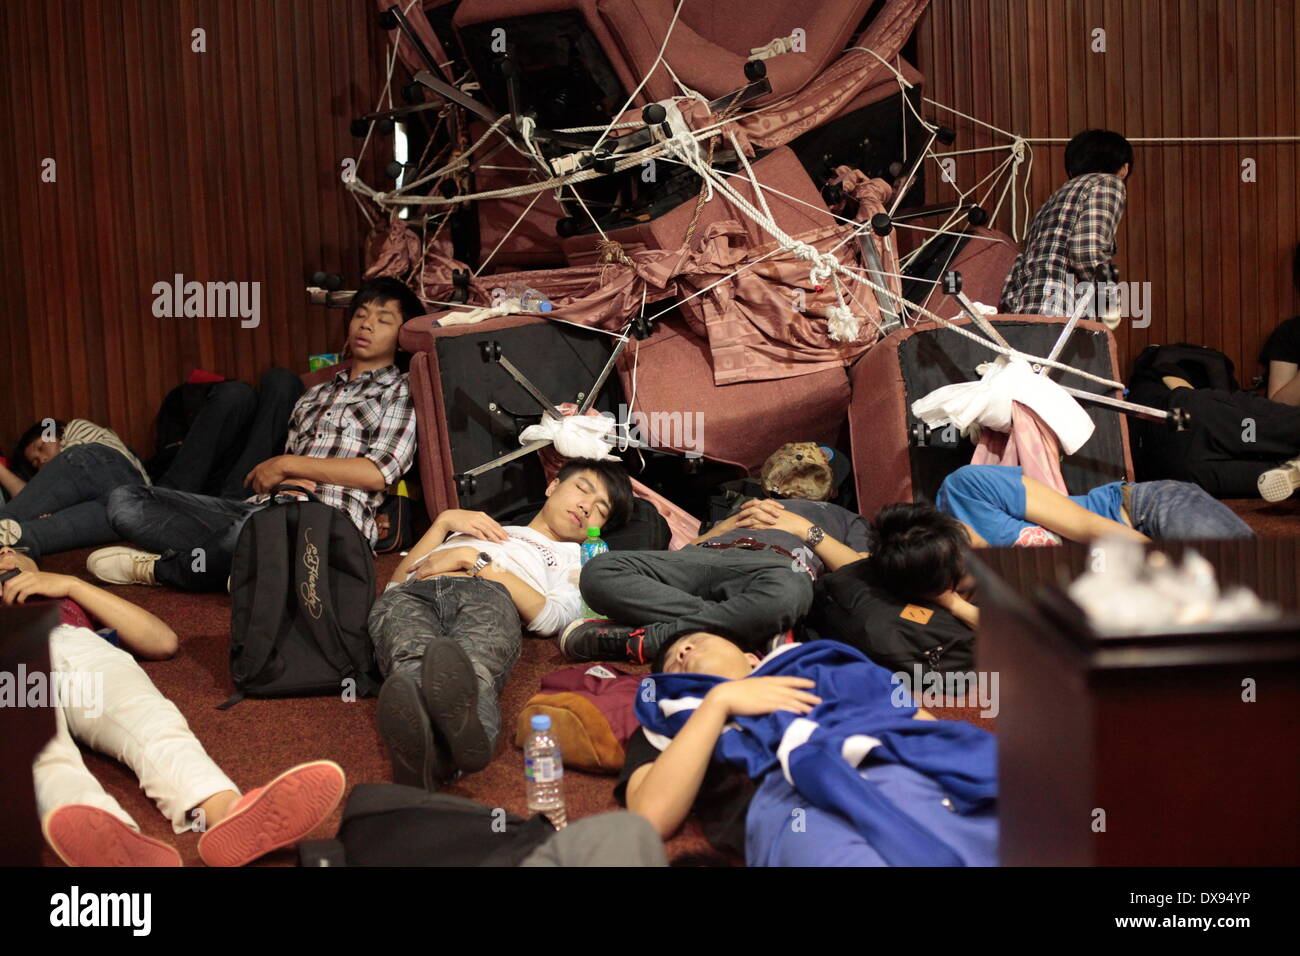 Taipei, Taiwan- March 20, 2014: Protesters slept exhaustedly beside the blocked entrances after several resistances against the storming of police forces on previous day. All entrances were blocked during the standoff to keep the police outside. Thousands of people crowded around Legislative Yuan while hundreds had broken into the building to occupy the legislative chamber since Mar. 18. Credit:  PACIFIC PRESS/Alamy Live News Stock Photo